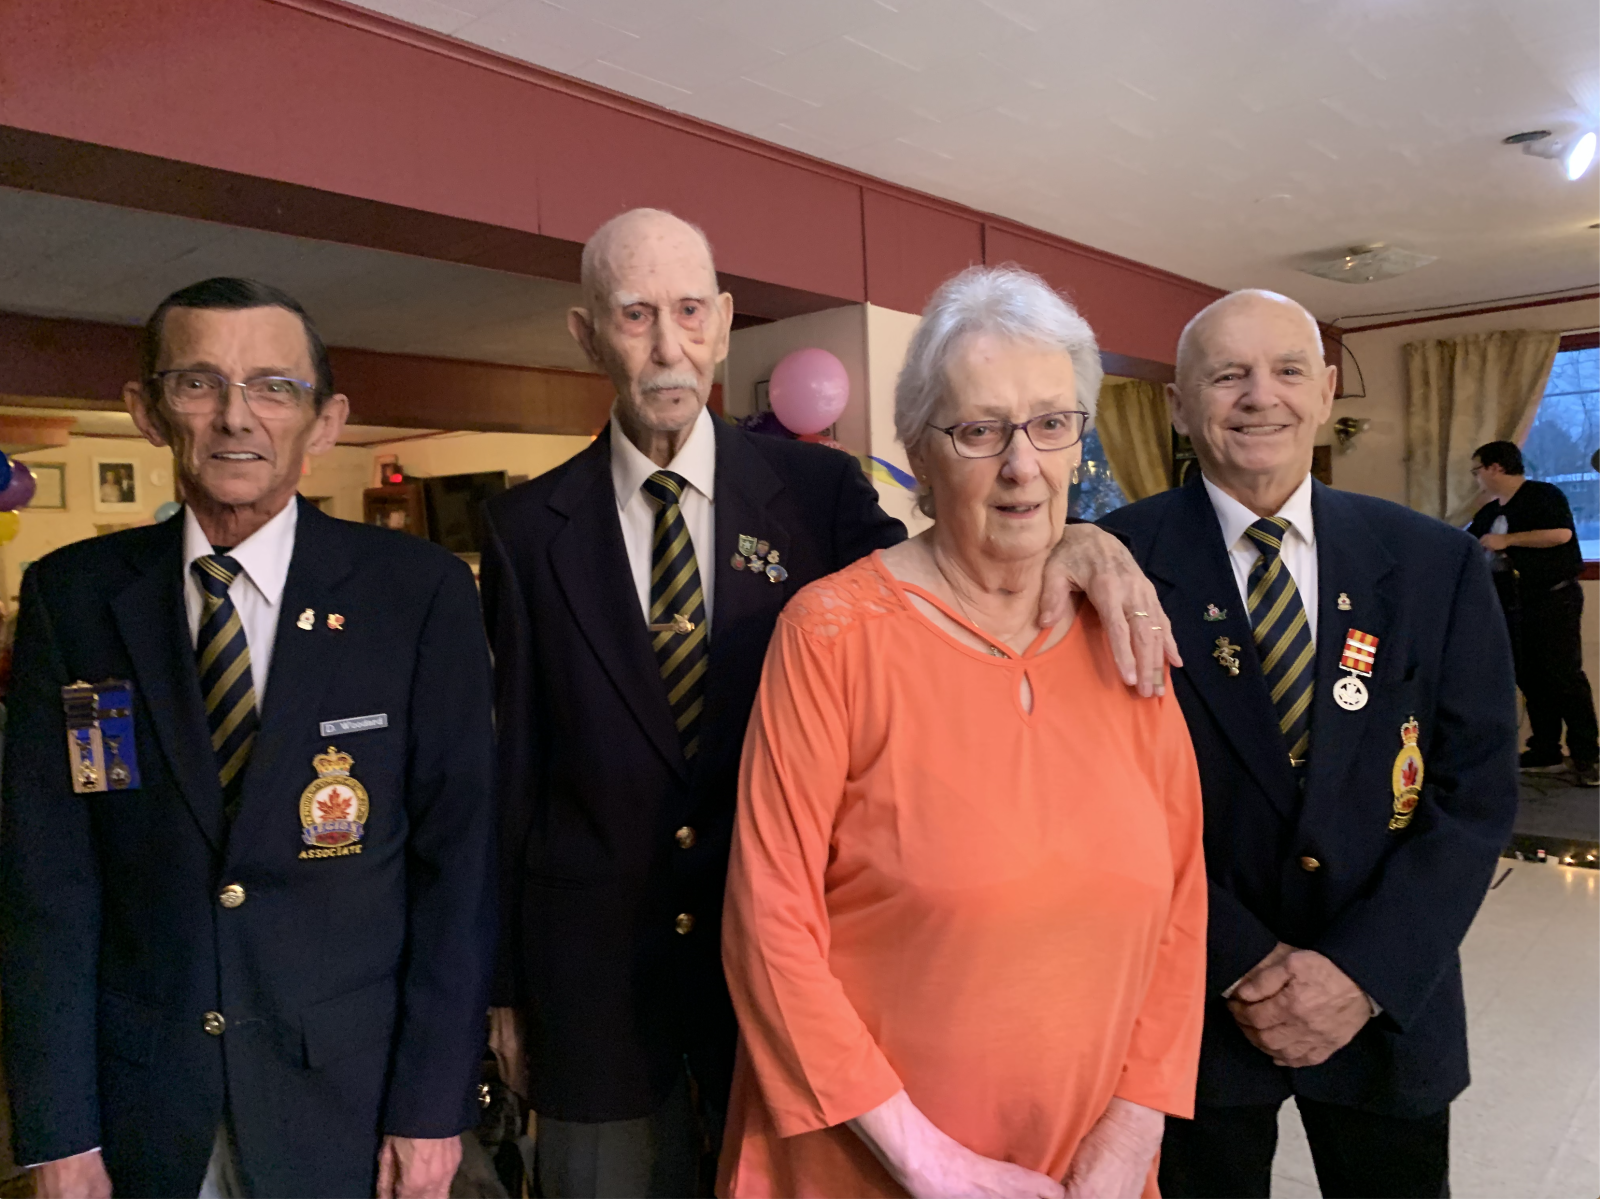 Donald Taylor celebrates 102 years with a surprise party